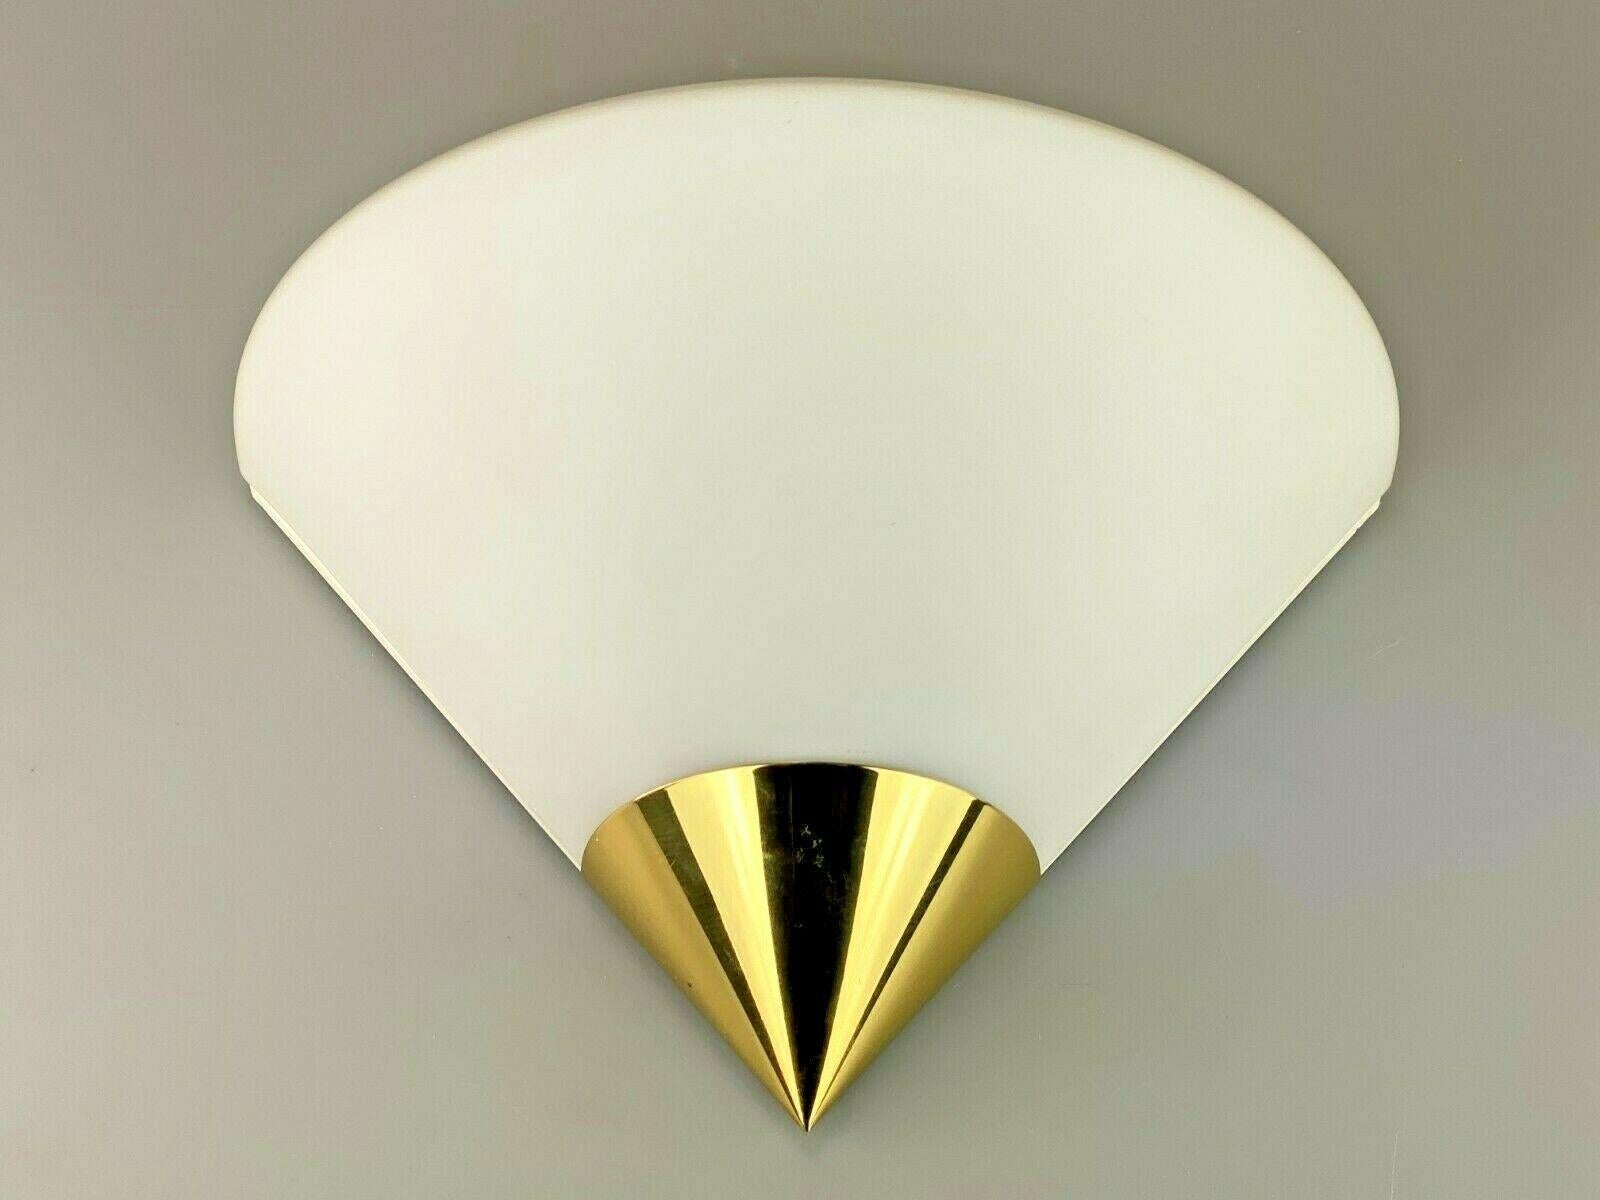 60s 70s lamp light wall lamp Limburg Plafoniere Space Age Design 60s

Object: wall lamp

Manufacturer: Glashütte Limburg

Condition: good - vintage

Age: around 1960-1970

Dimensions:

35.5cm x 24cm x 19cm

Other notes:

The pictures